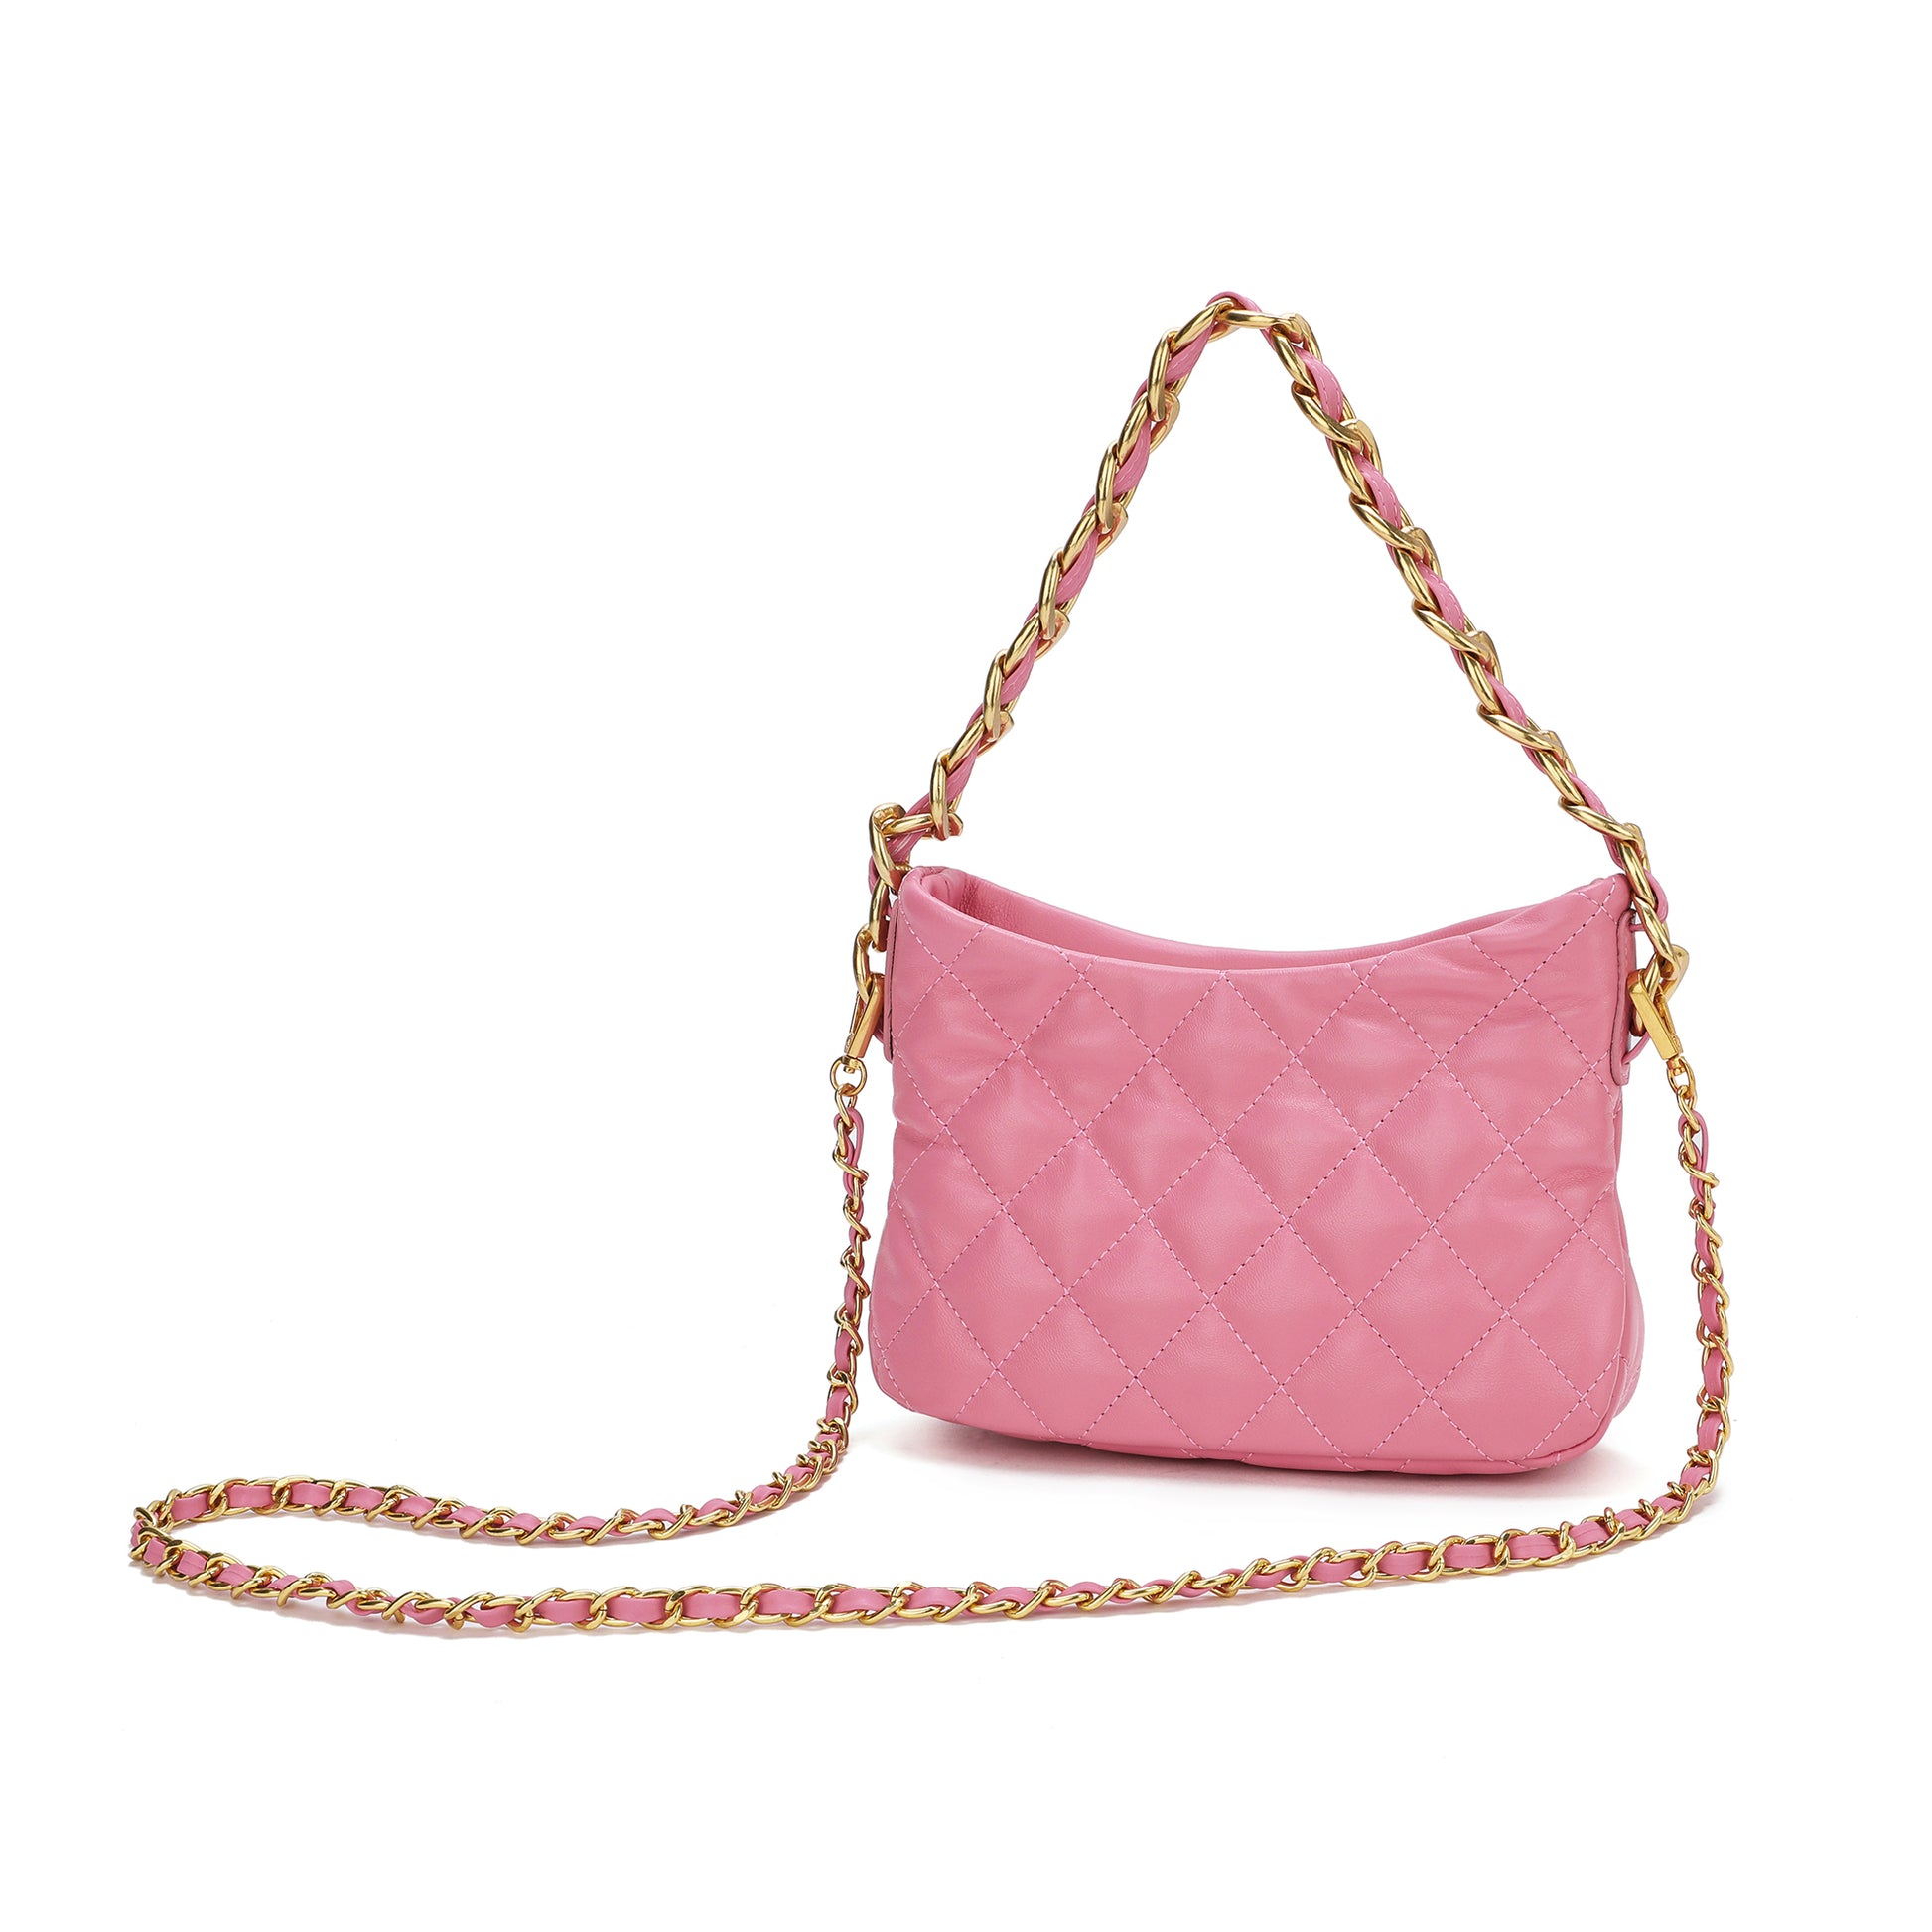 Chanel Pink Quilted Caviar Crossbody Bag